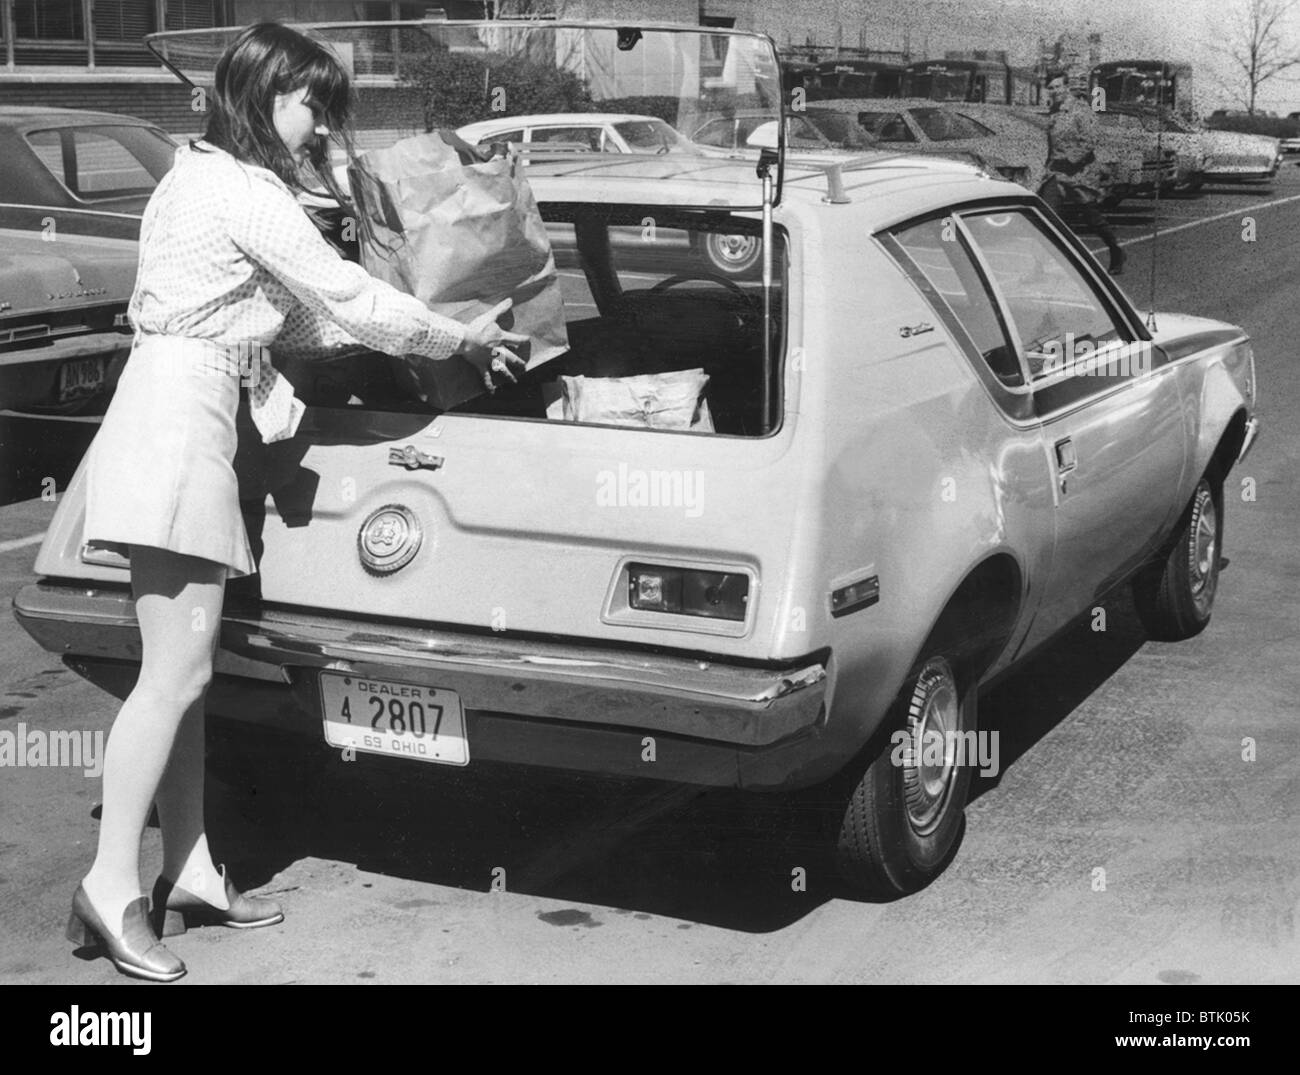 American Motors' The Gremlin, car owner placing grocery bags inside the rear lift-gate, April 9, 1970. Photo: CSU Archives/Evere Stock Photo